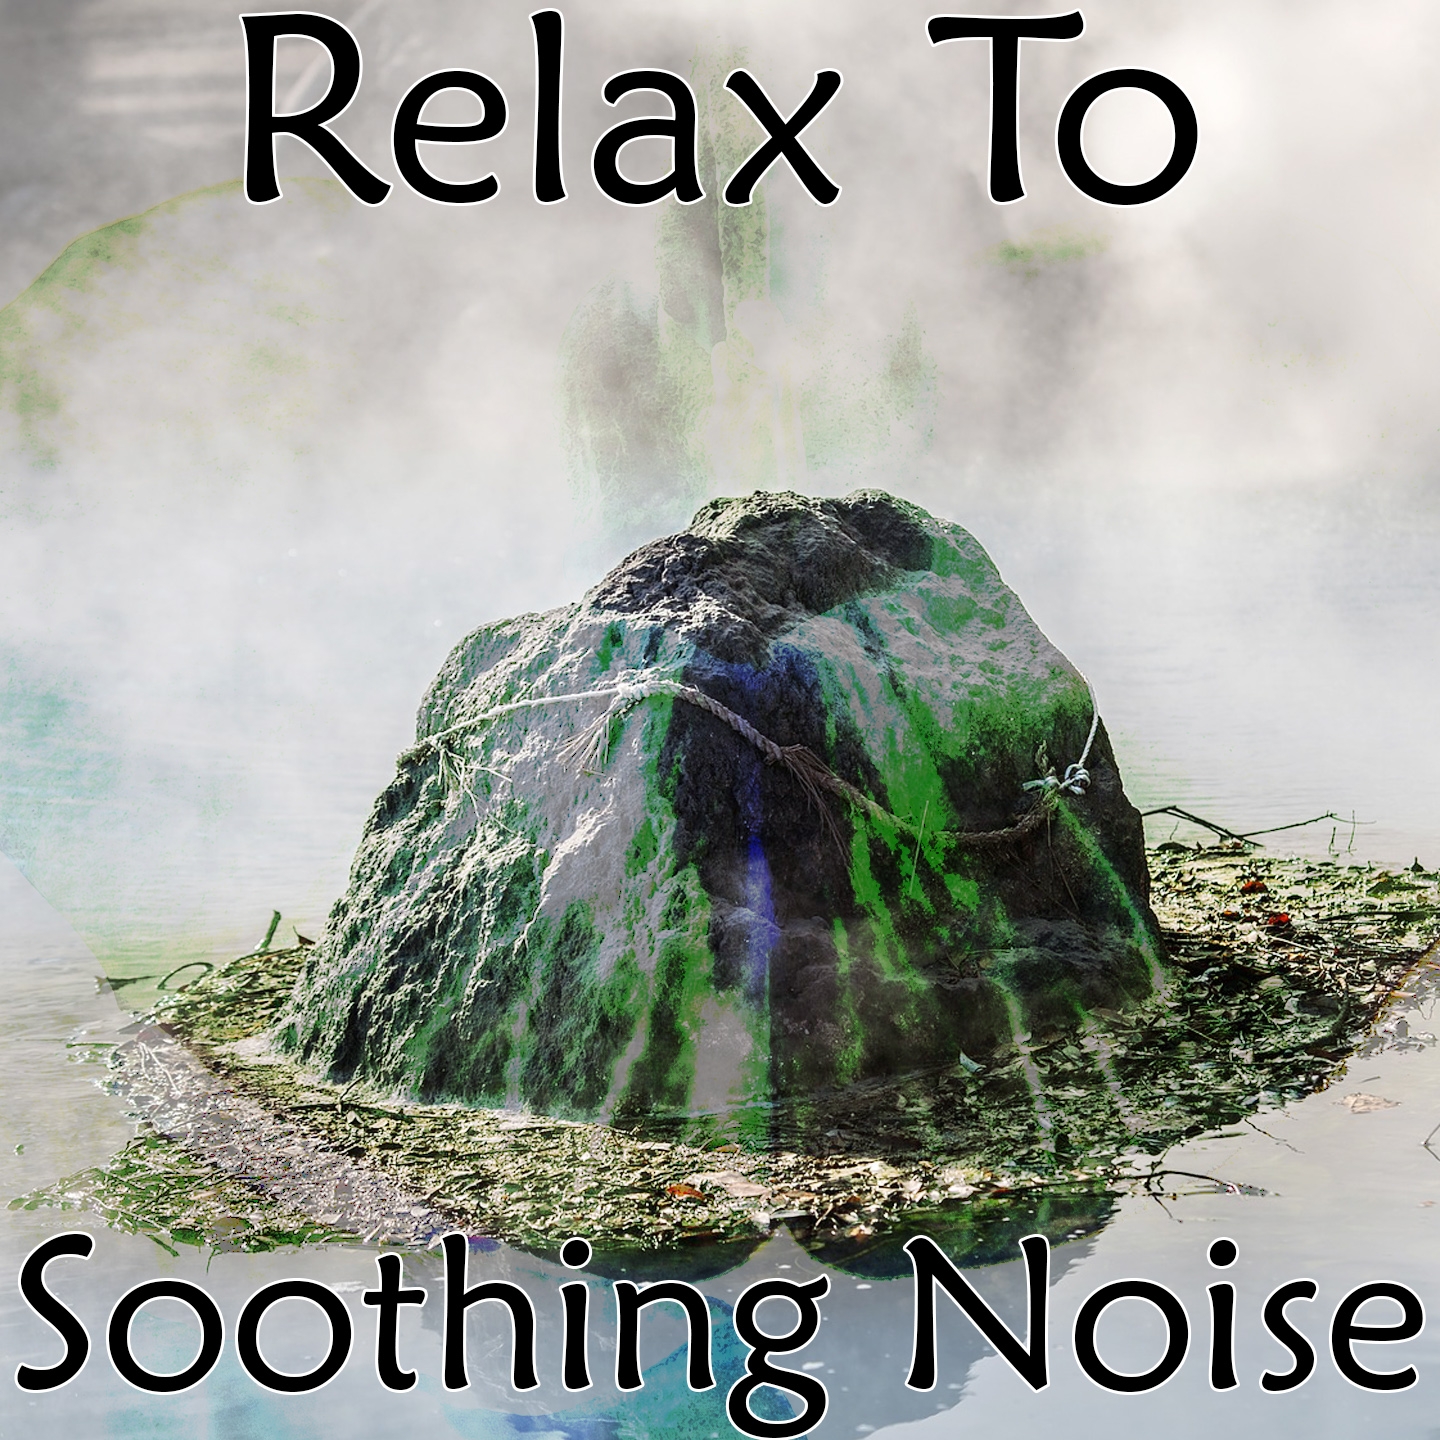 Relax To Soothing Noise